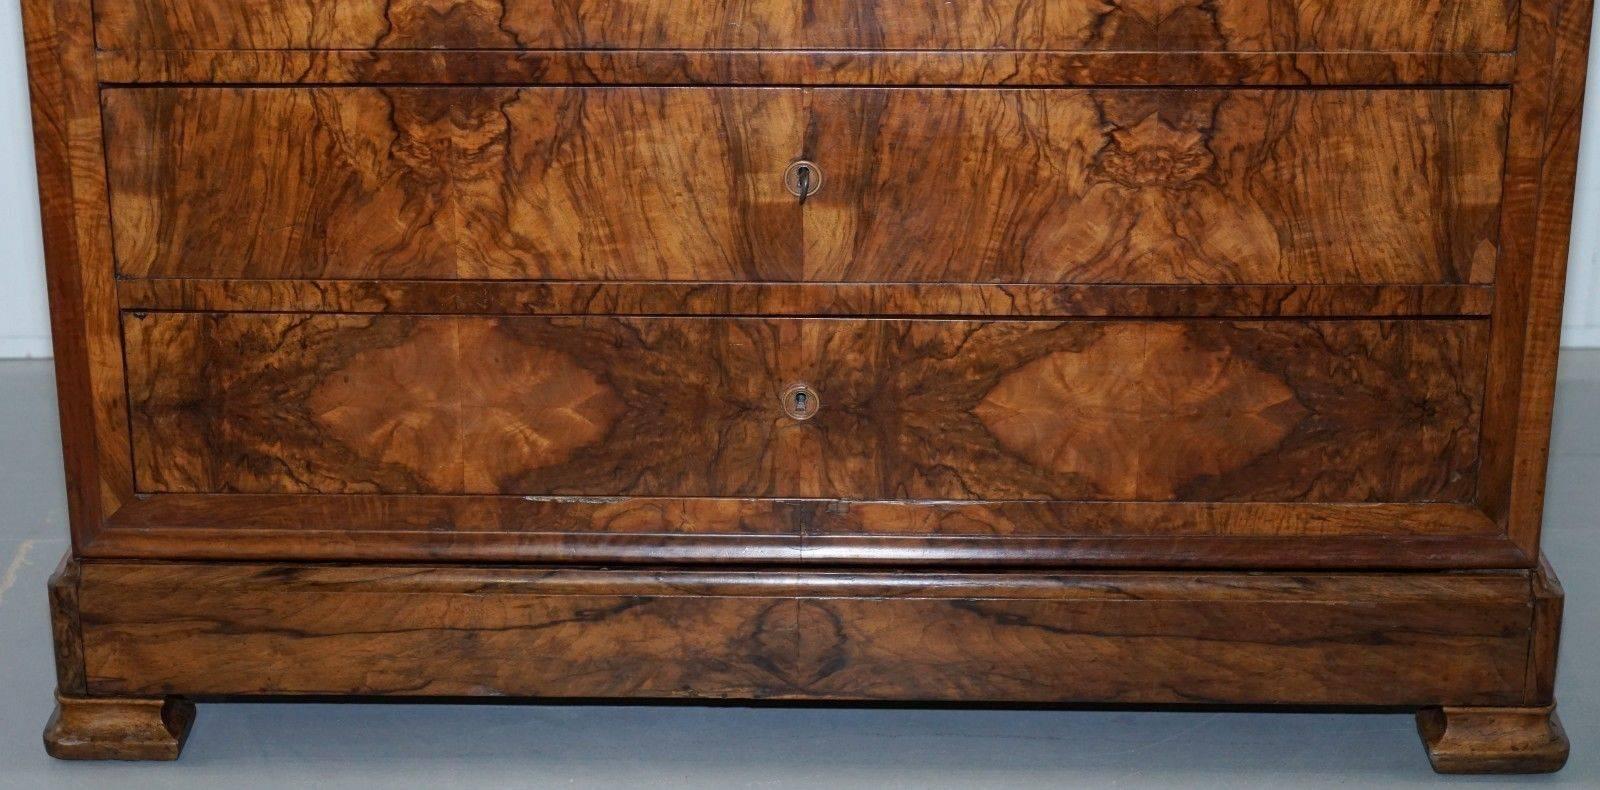 Hand-Crafted Stunning circa 1850 Solid Walnut Biedermeier Chest / Bank of Drawers Patina